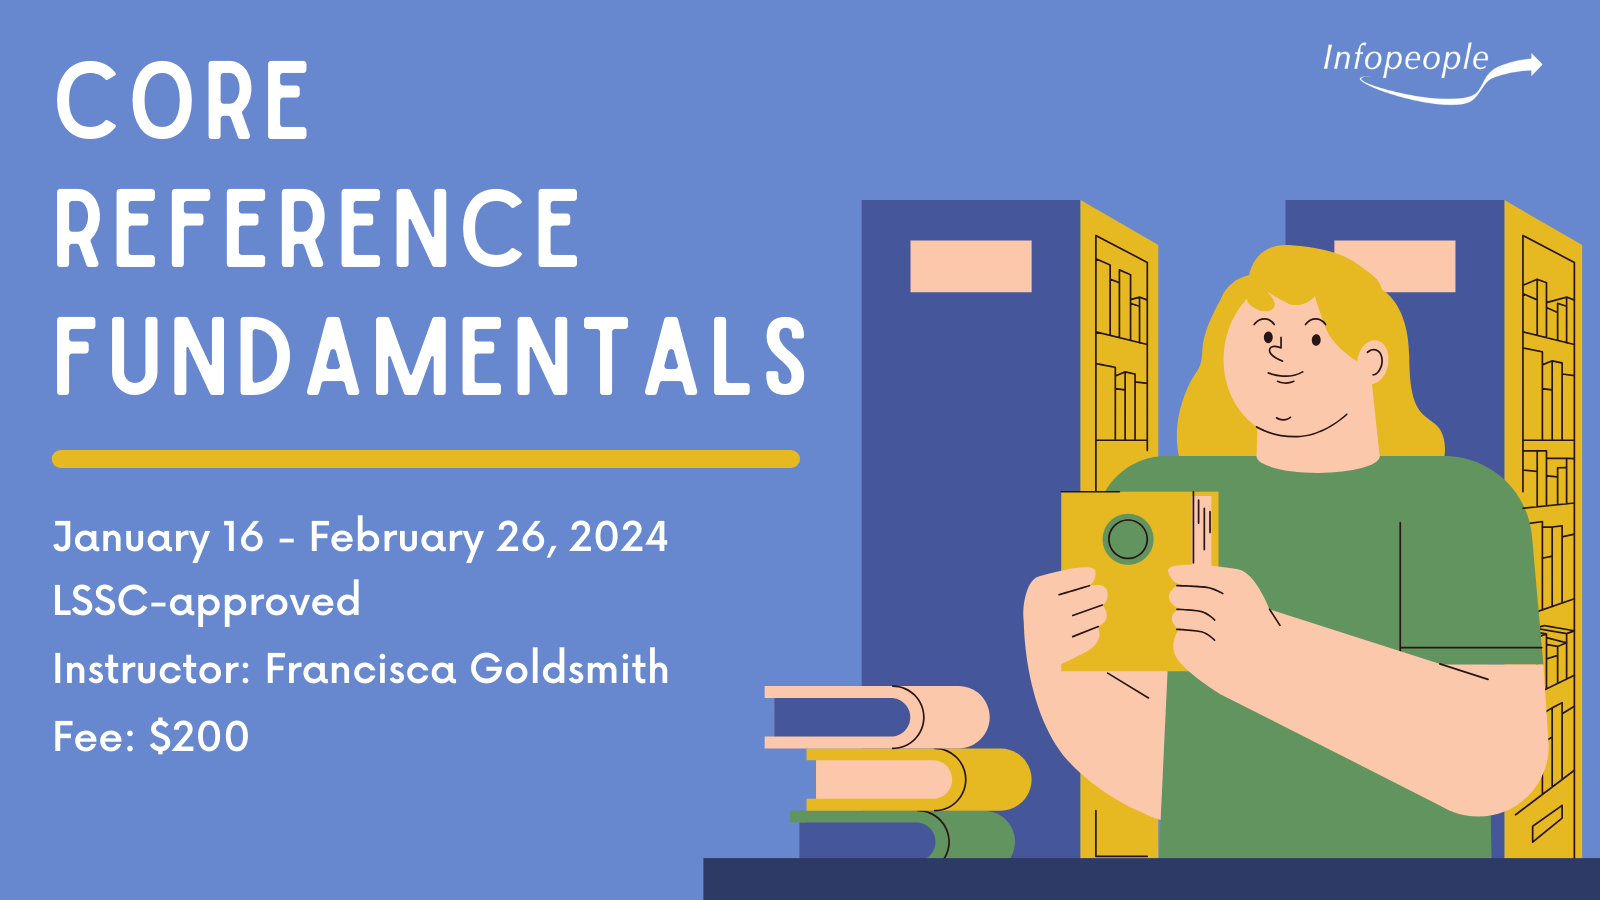 Core Reference Fundamentals - an Infopeople course. January 16 to February 26, 2024. LSSC-approved. Instructor: Francisca Goldsmith. Fee:$200. A man standing behind a library desk holding a book.